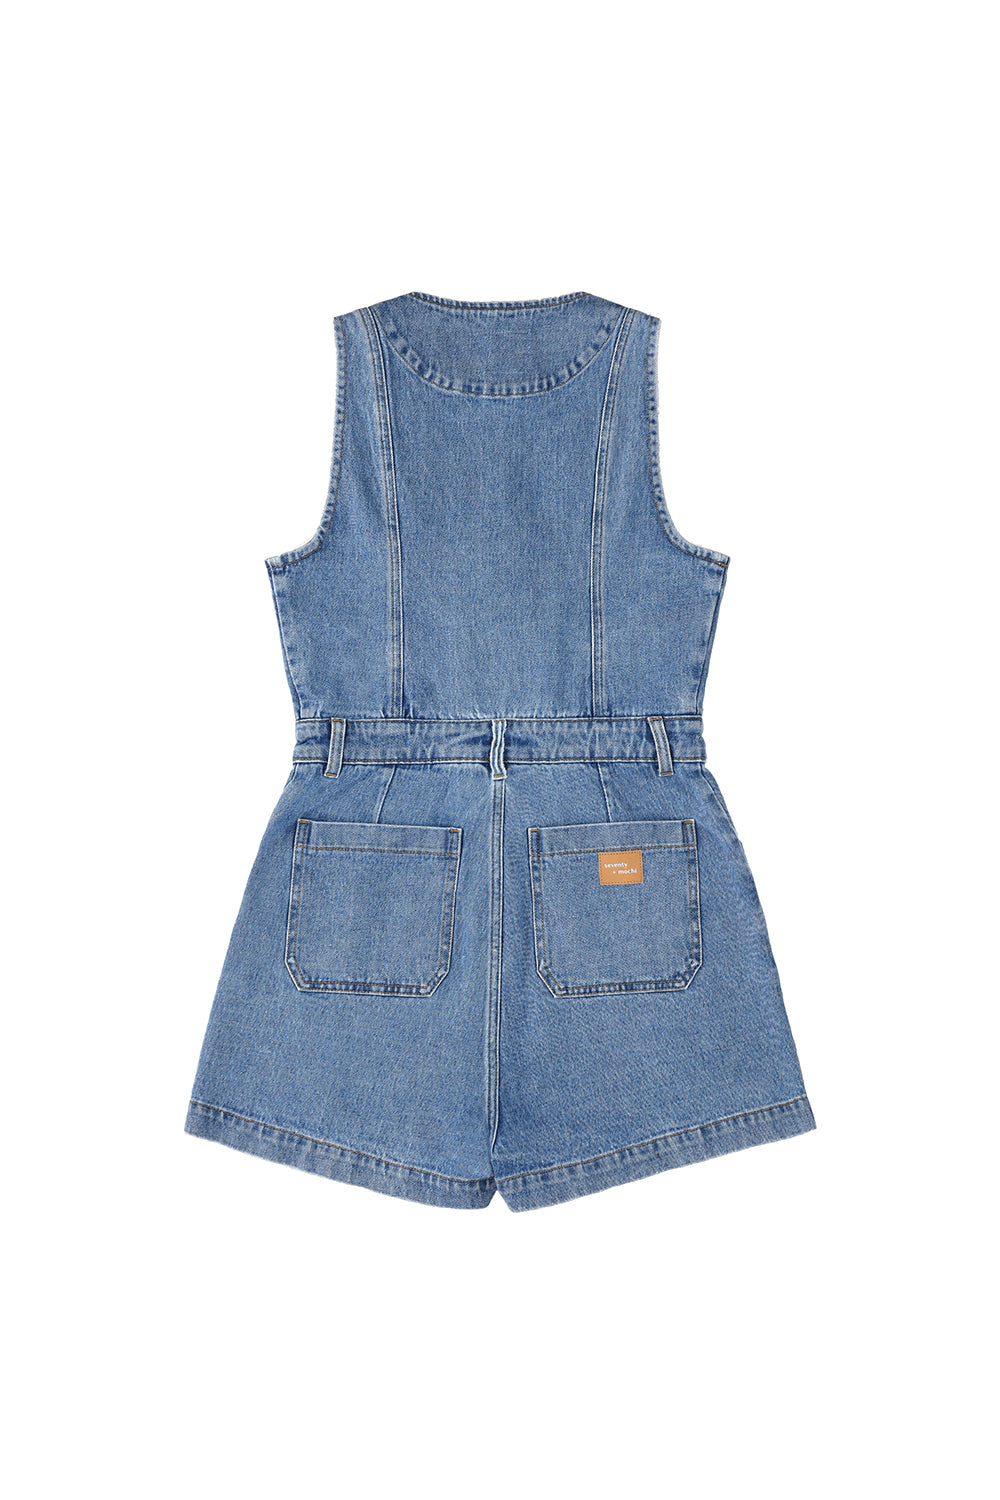 Bea All In One in Washed Indigo